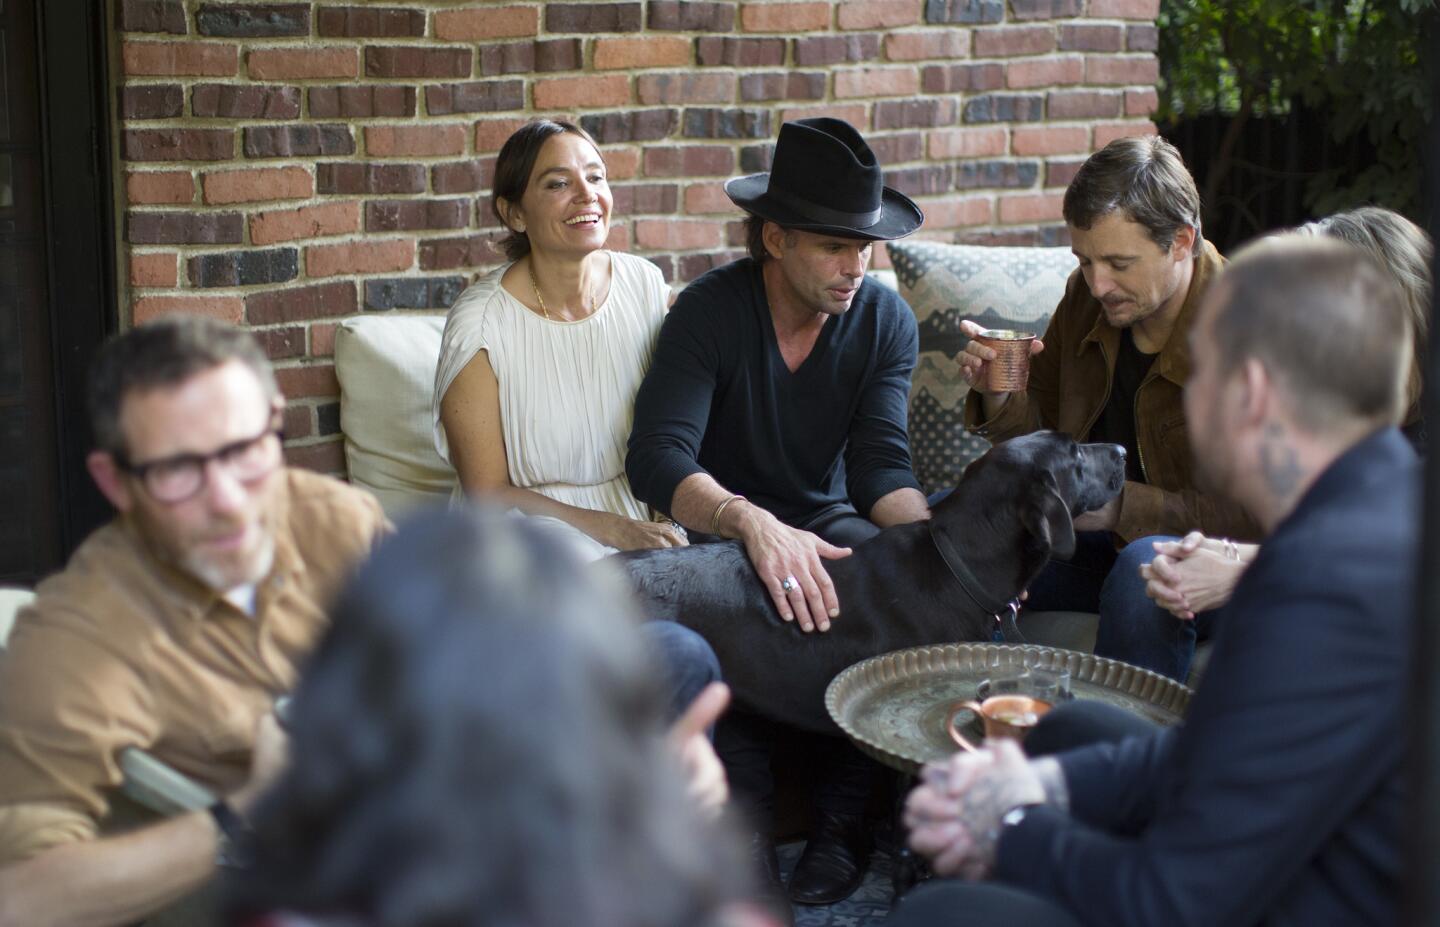 Actor Walton Goggins and wife Nadia Conners, left, entertain guests, including singer-songwriter Sturgill Simpson, right, at their Hollywood home.